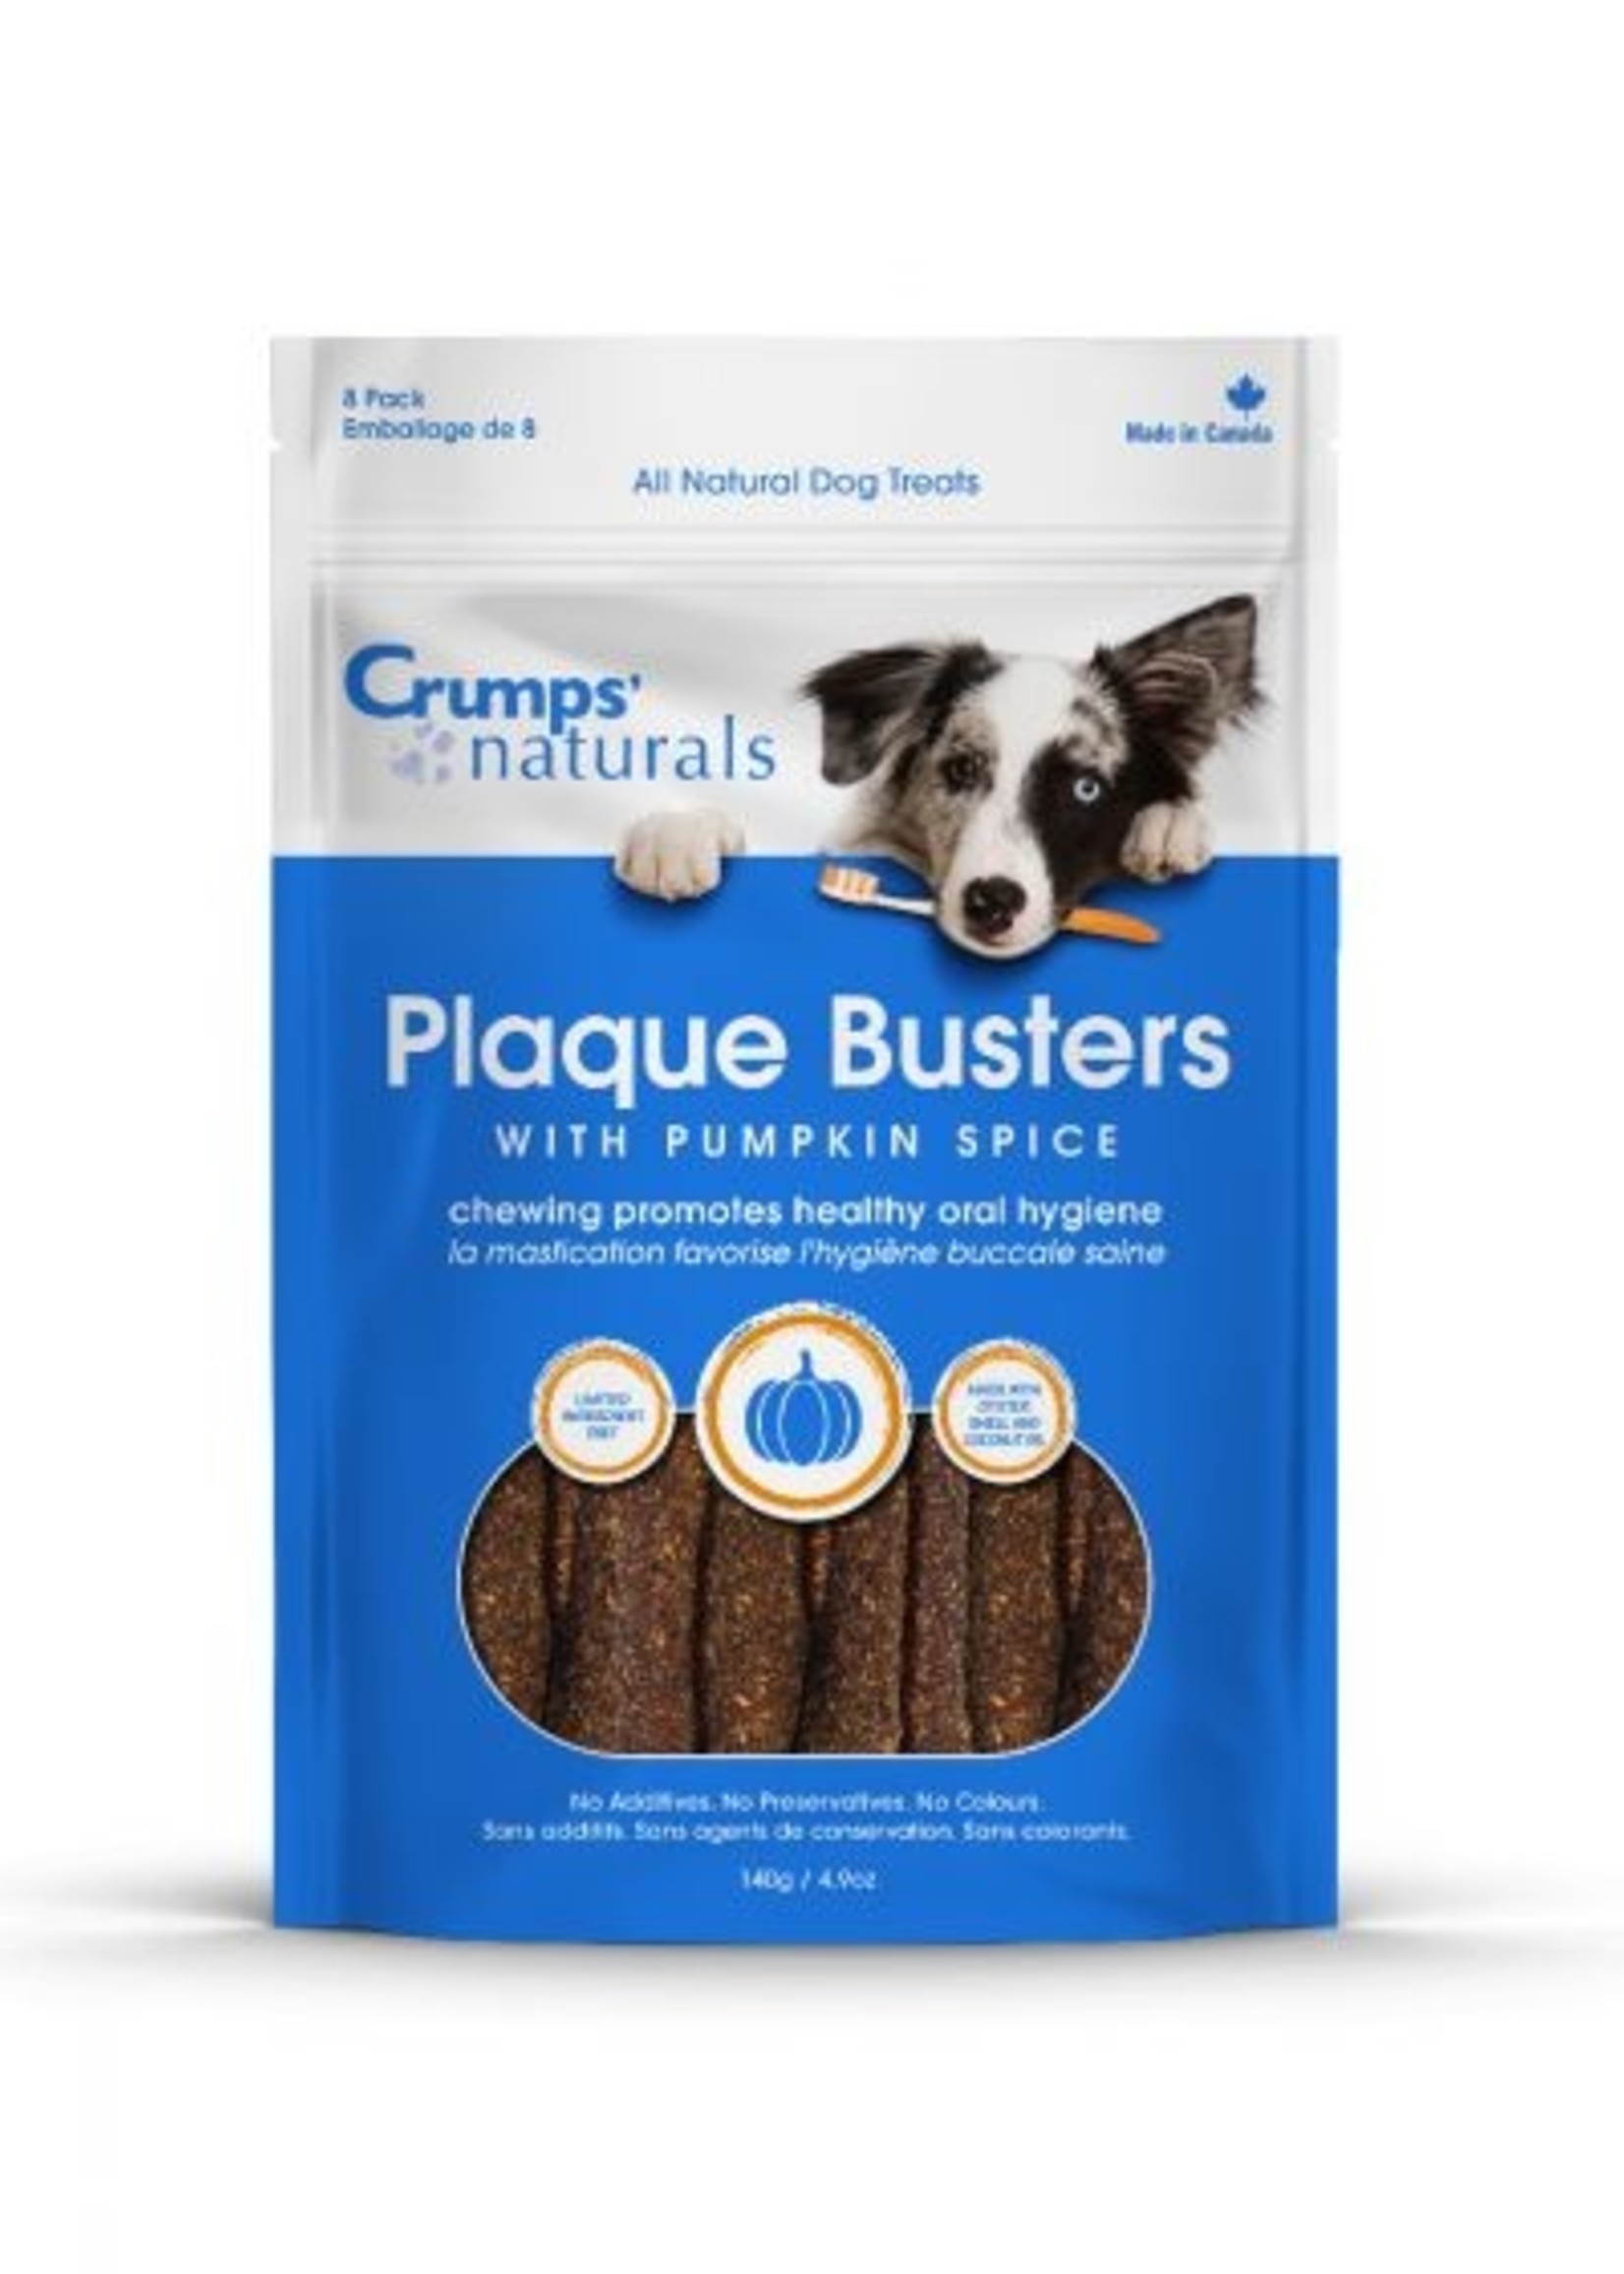 Crumps' Plaque Busters with Pumpkin Spice 4.9oz